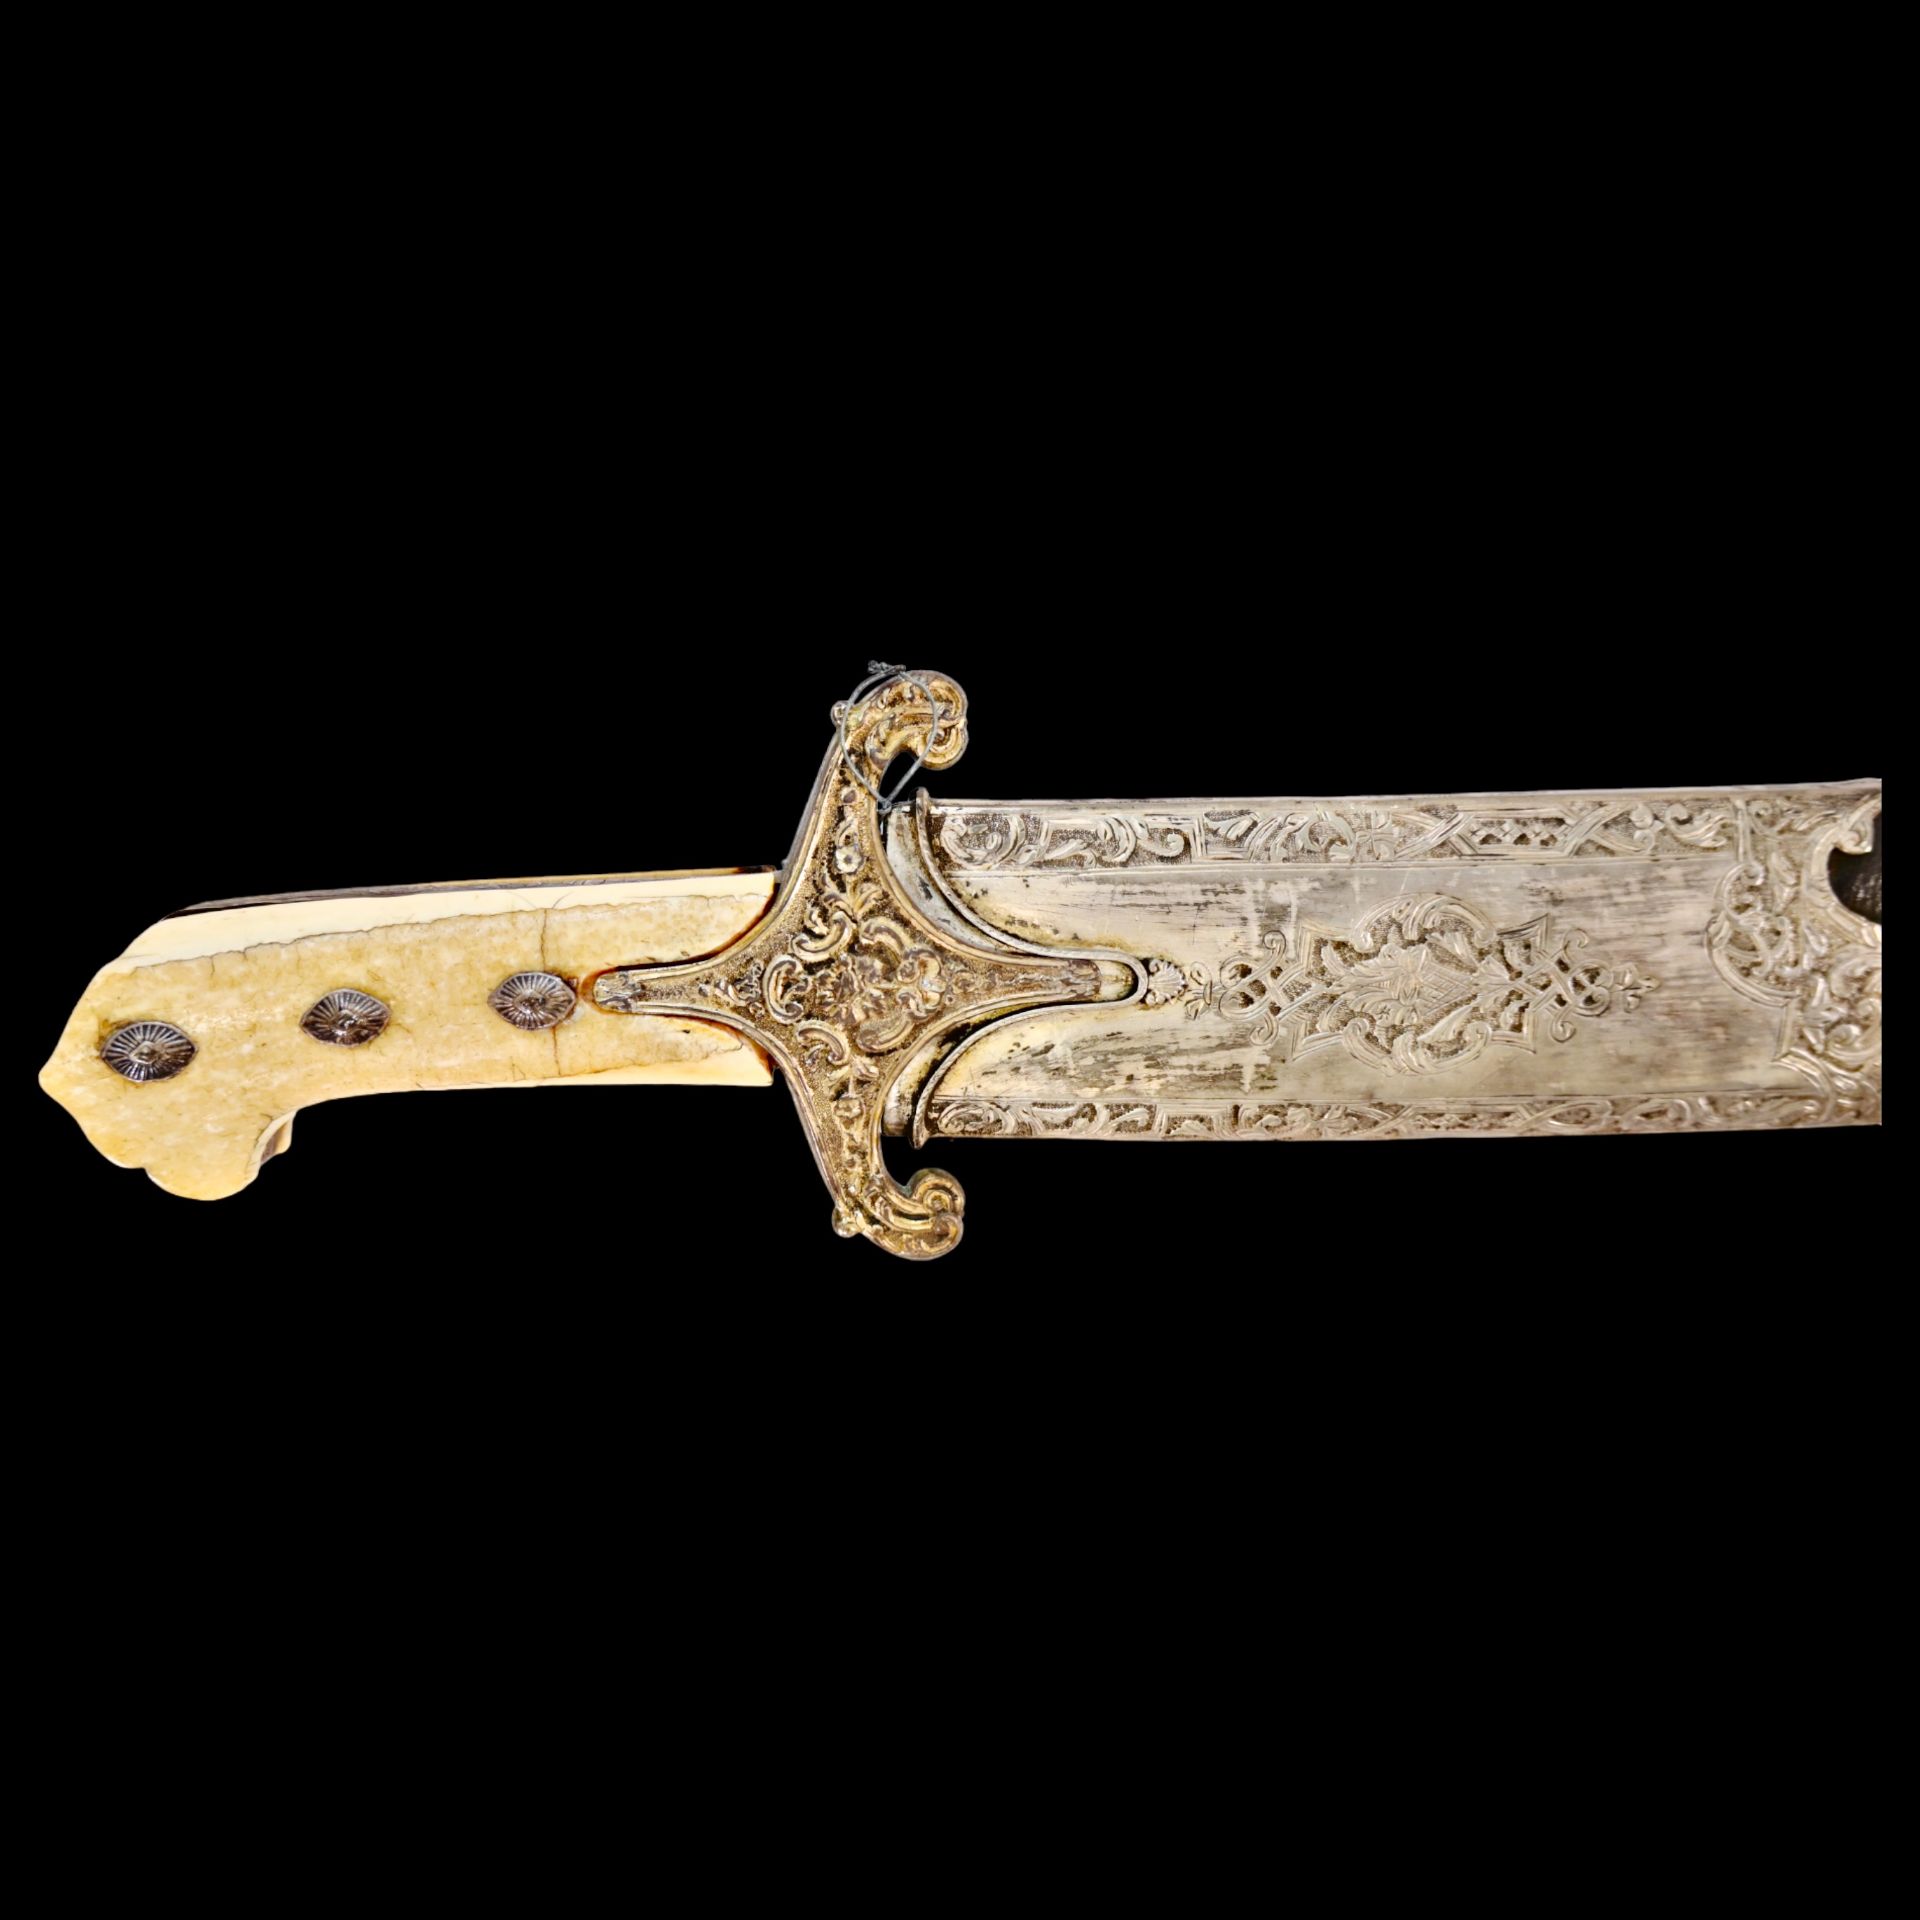 Rare Ottoman saber KARABELA, wootz blade, silver with the tugra of Sultan Ahmed III, early 18th C. - Bild 4 aus 27